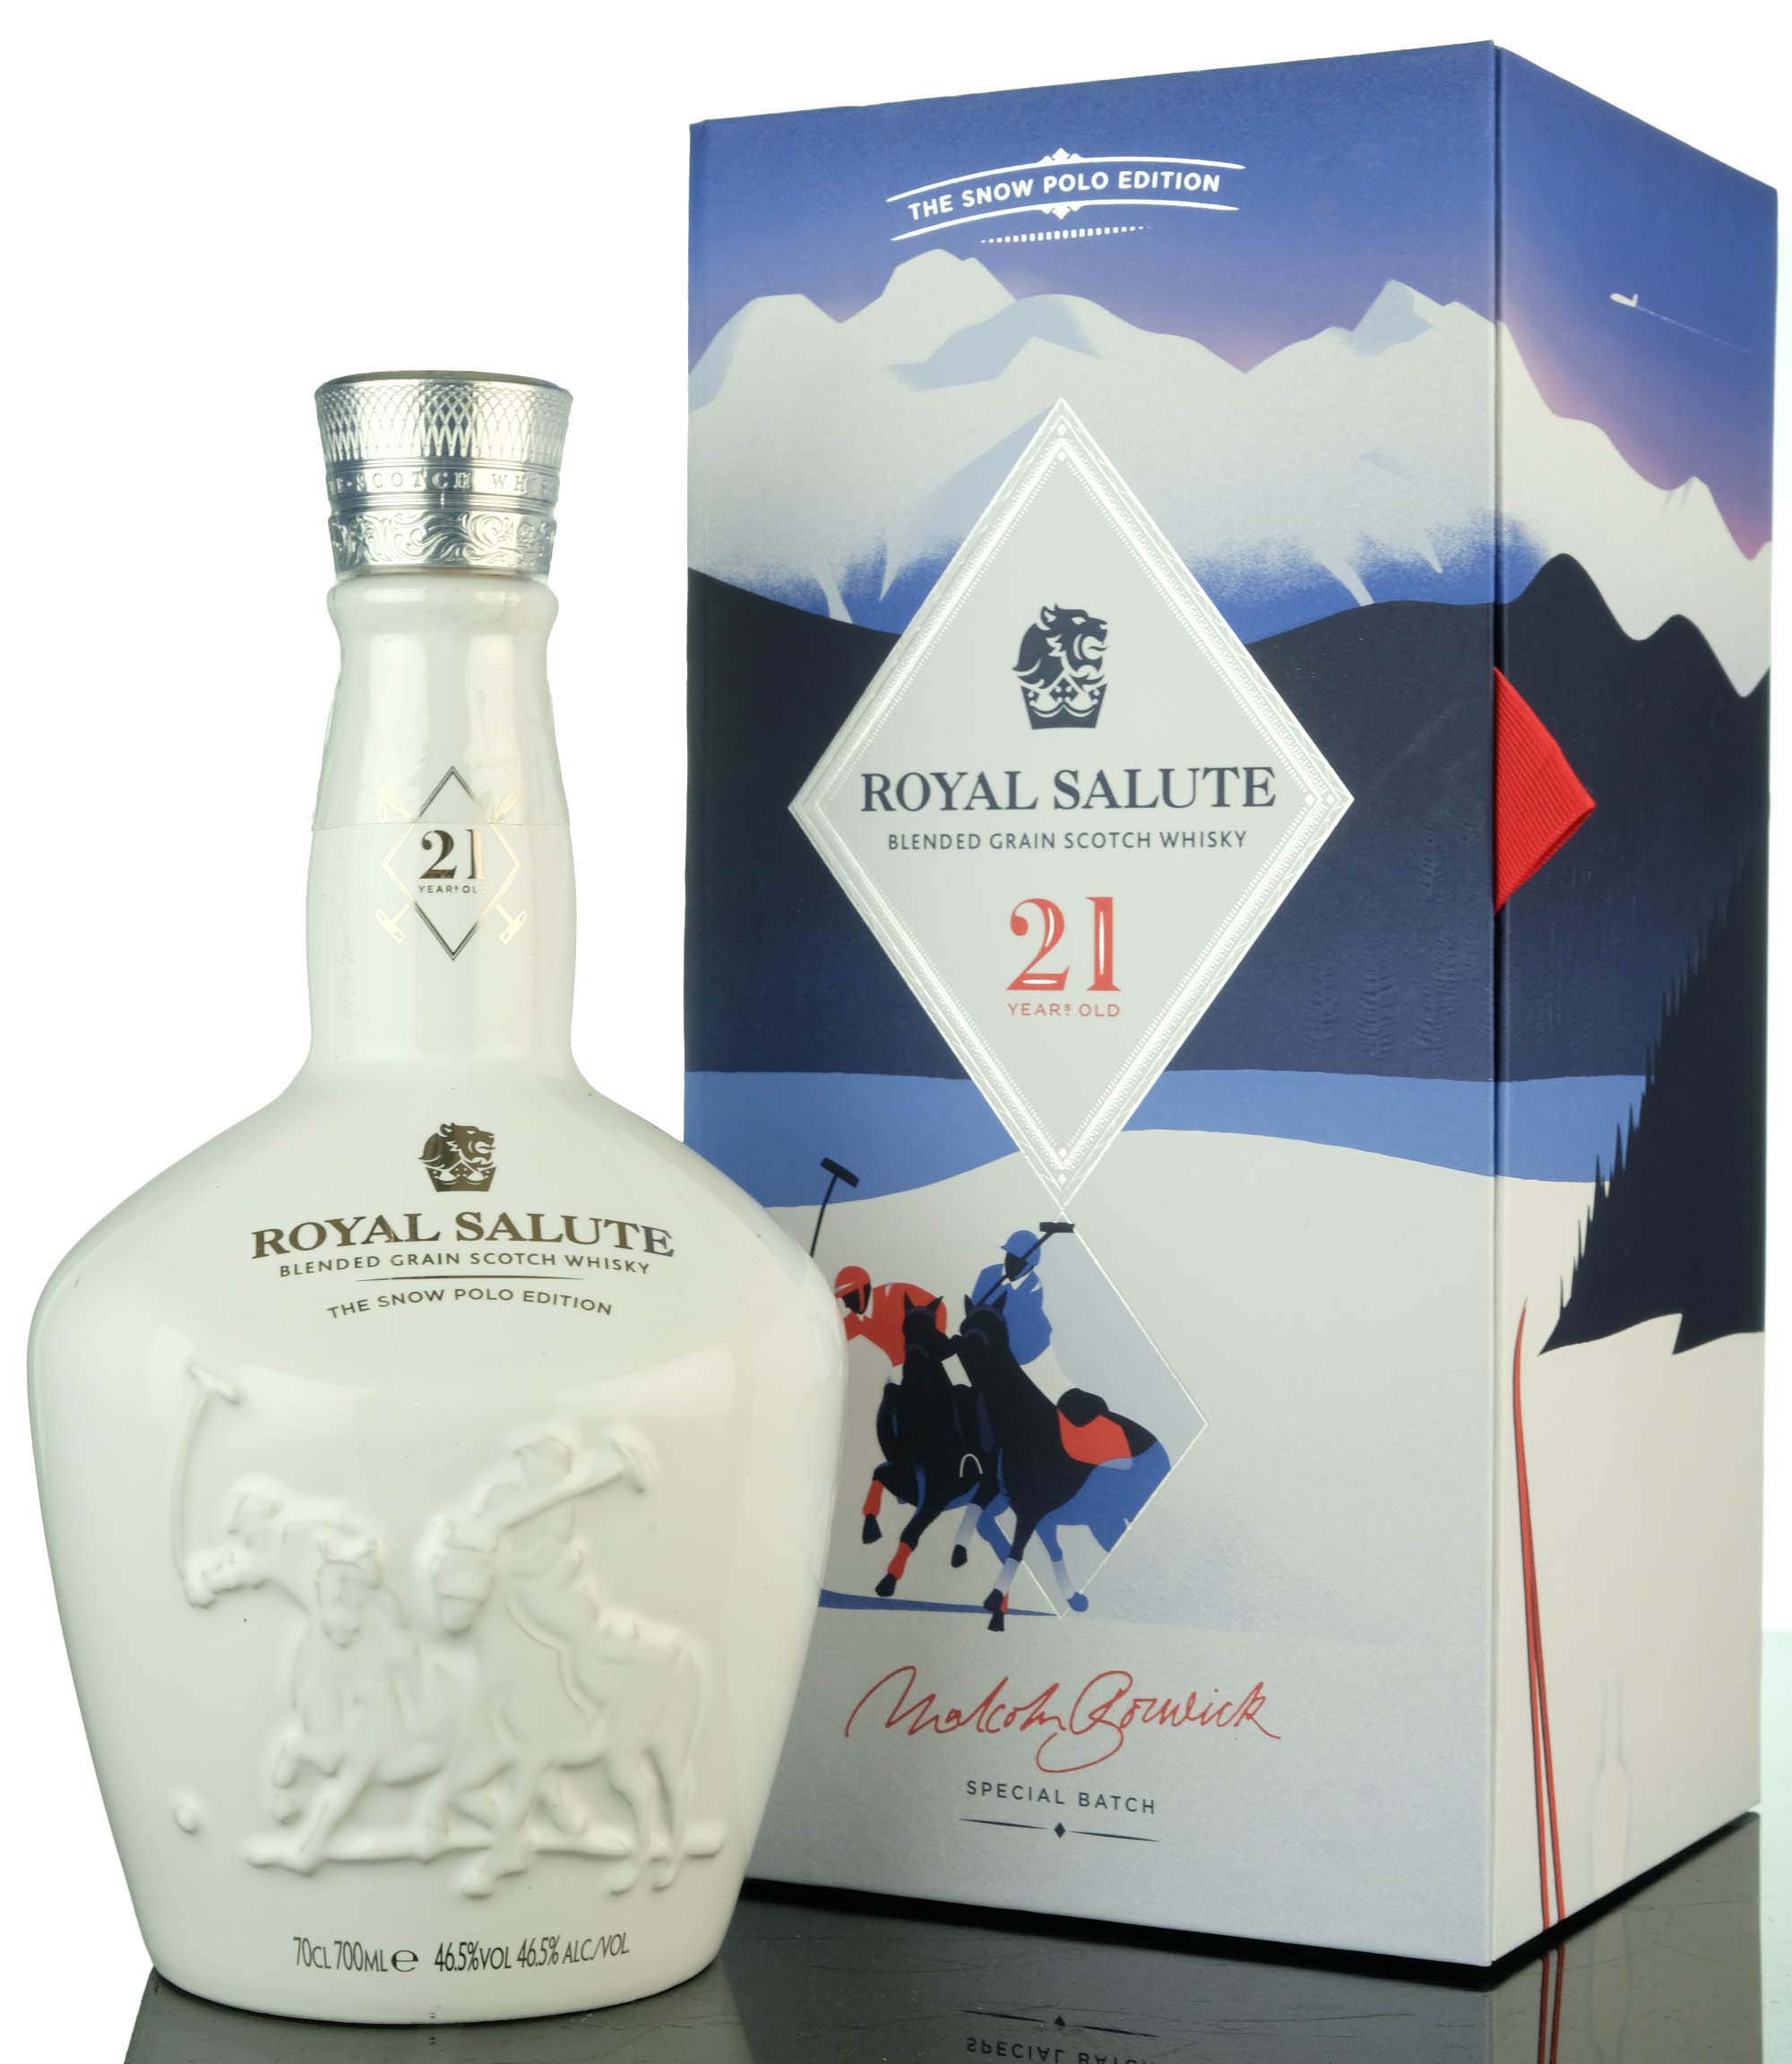 Royal Salute 21 Year Old - The Snow Polo Edition - 2020 Release - Ceramic